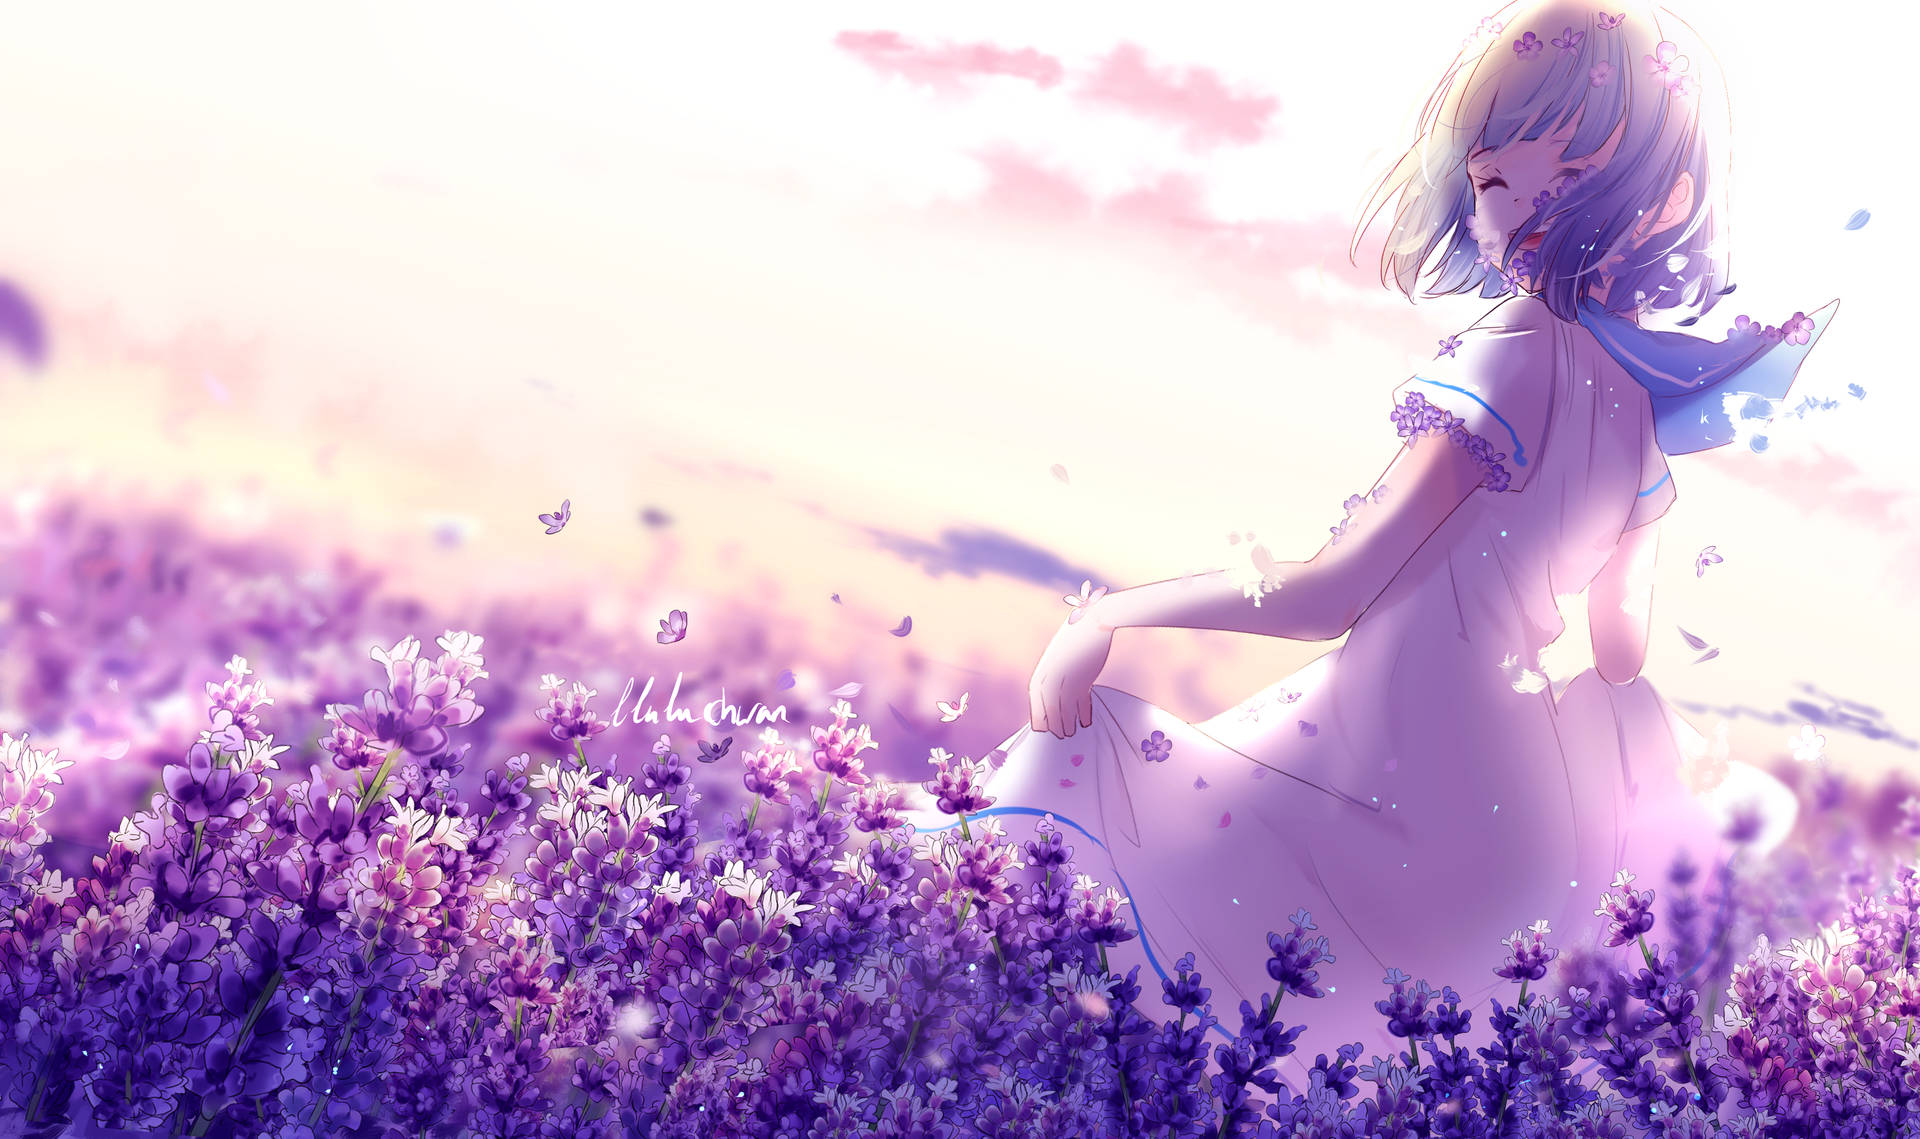 Serenity Of Spring In 4k: Woman In White Dress Amidst The Blossoming Flower Field